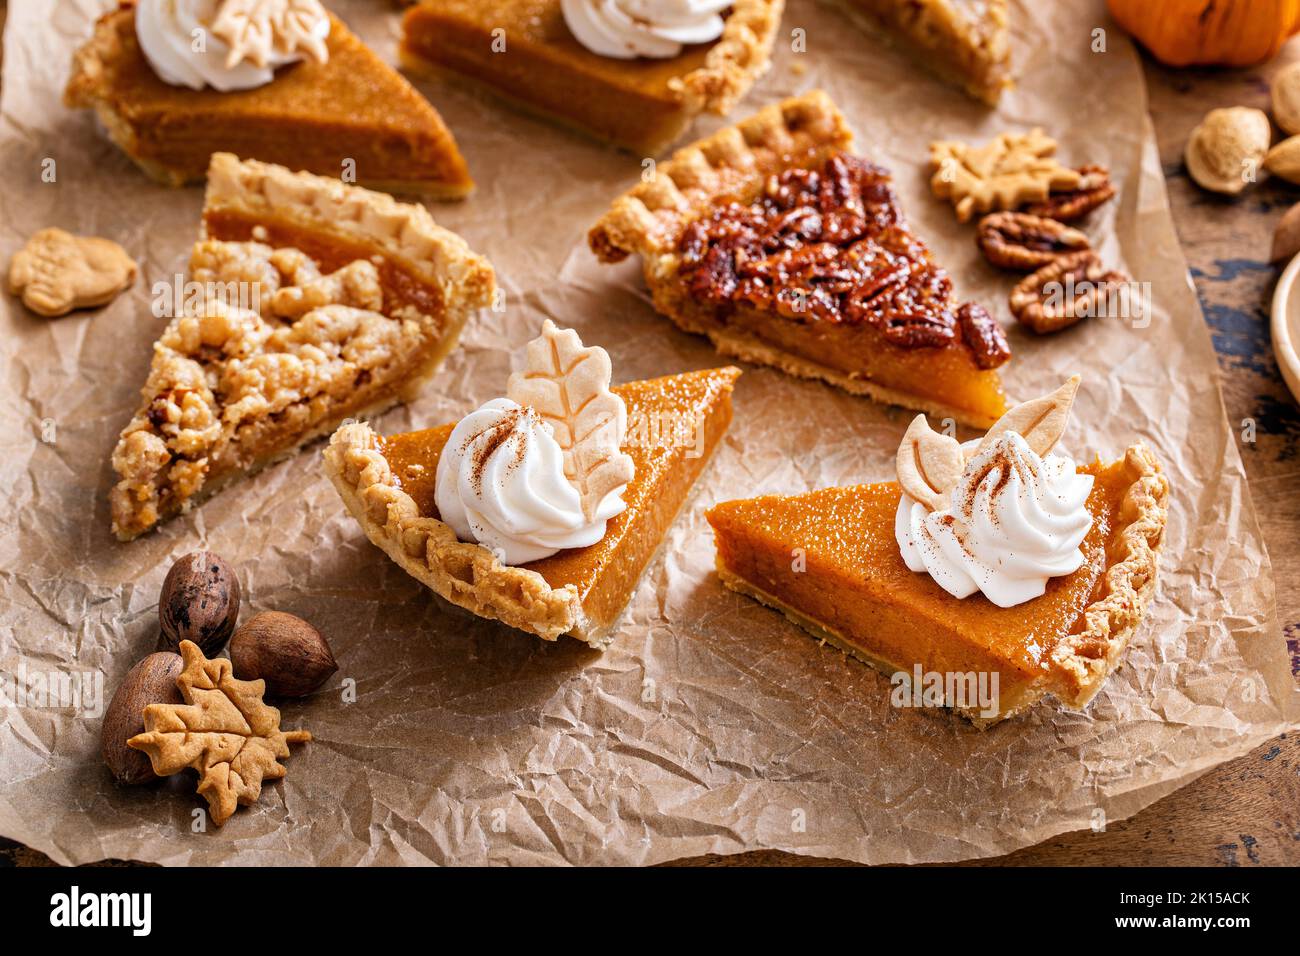 Variety of Thanksgiving pie slices on parchment paper Stock Photo